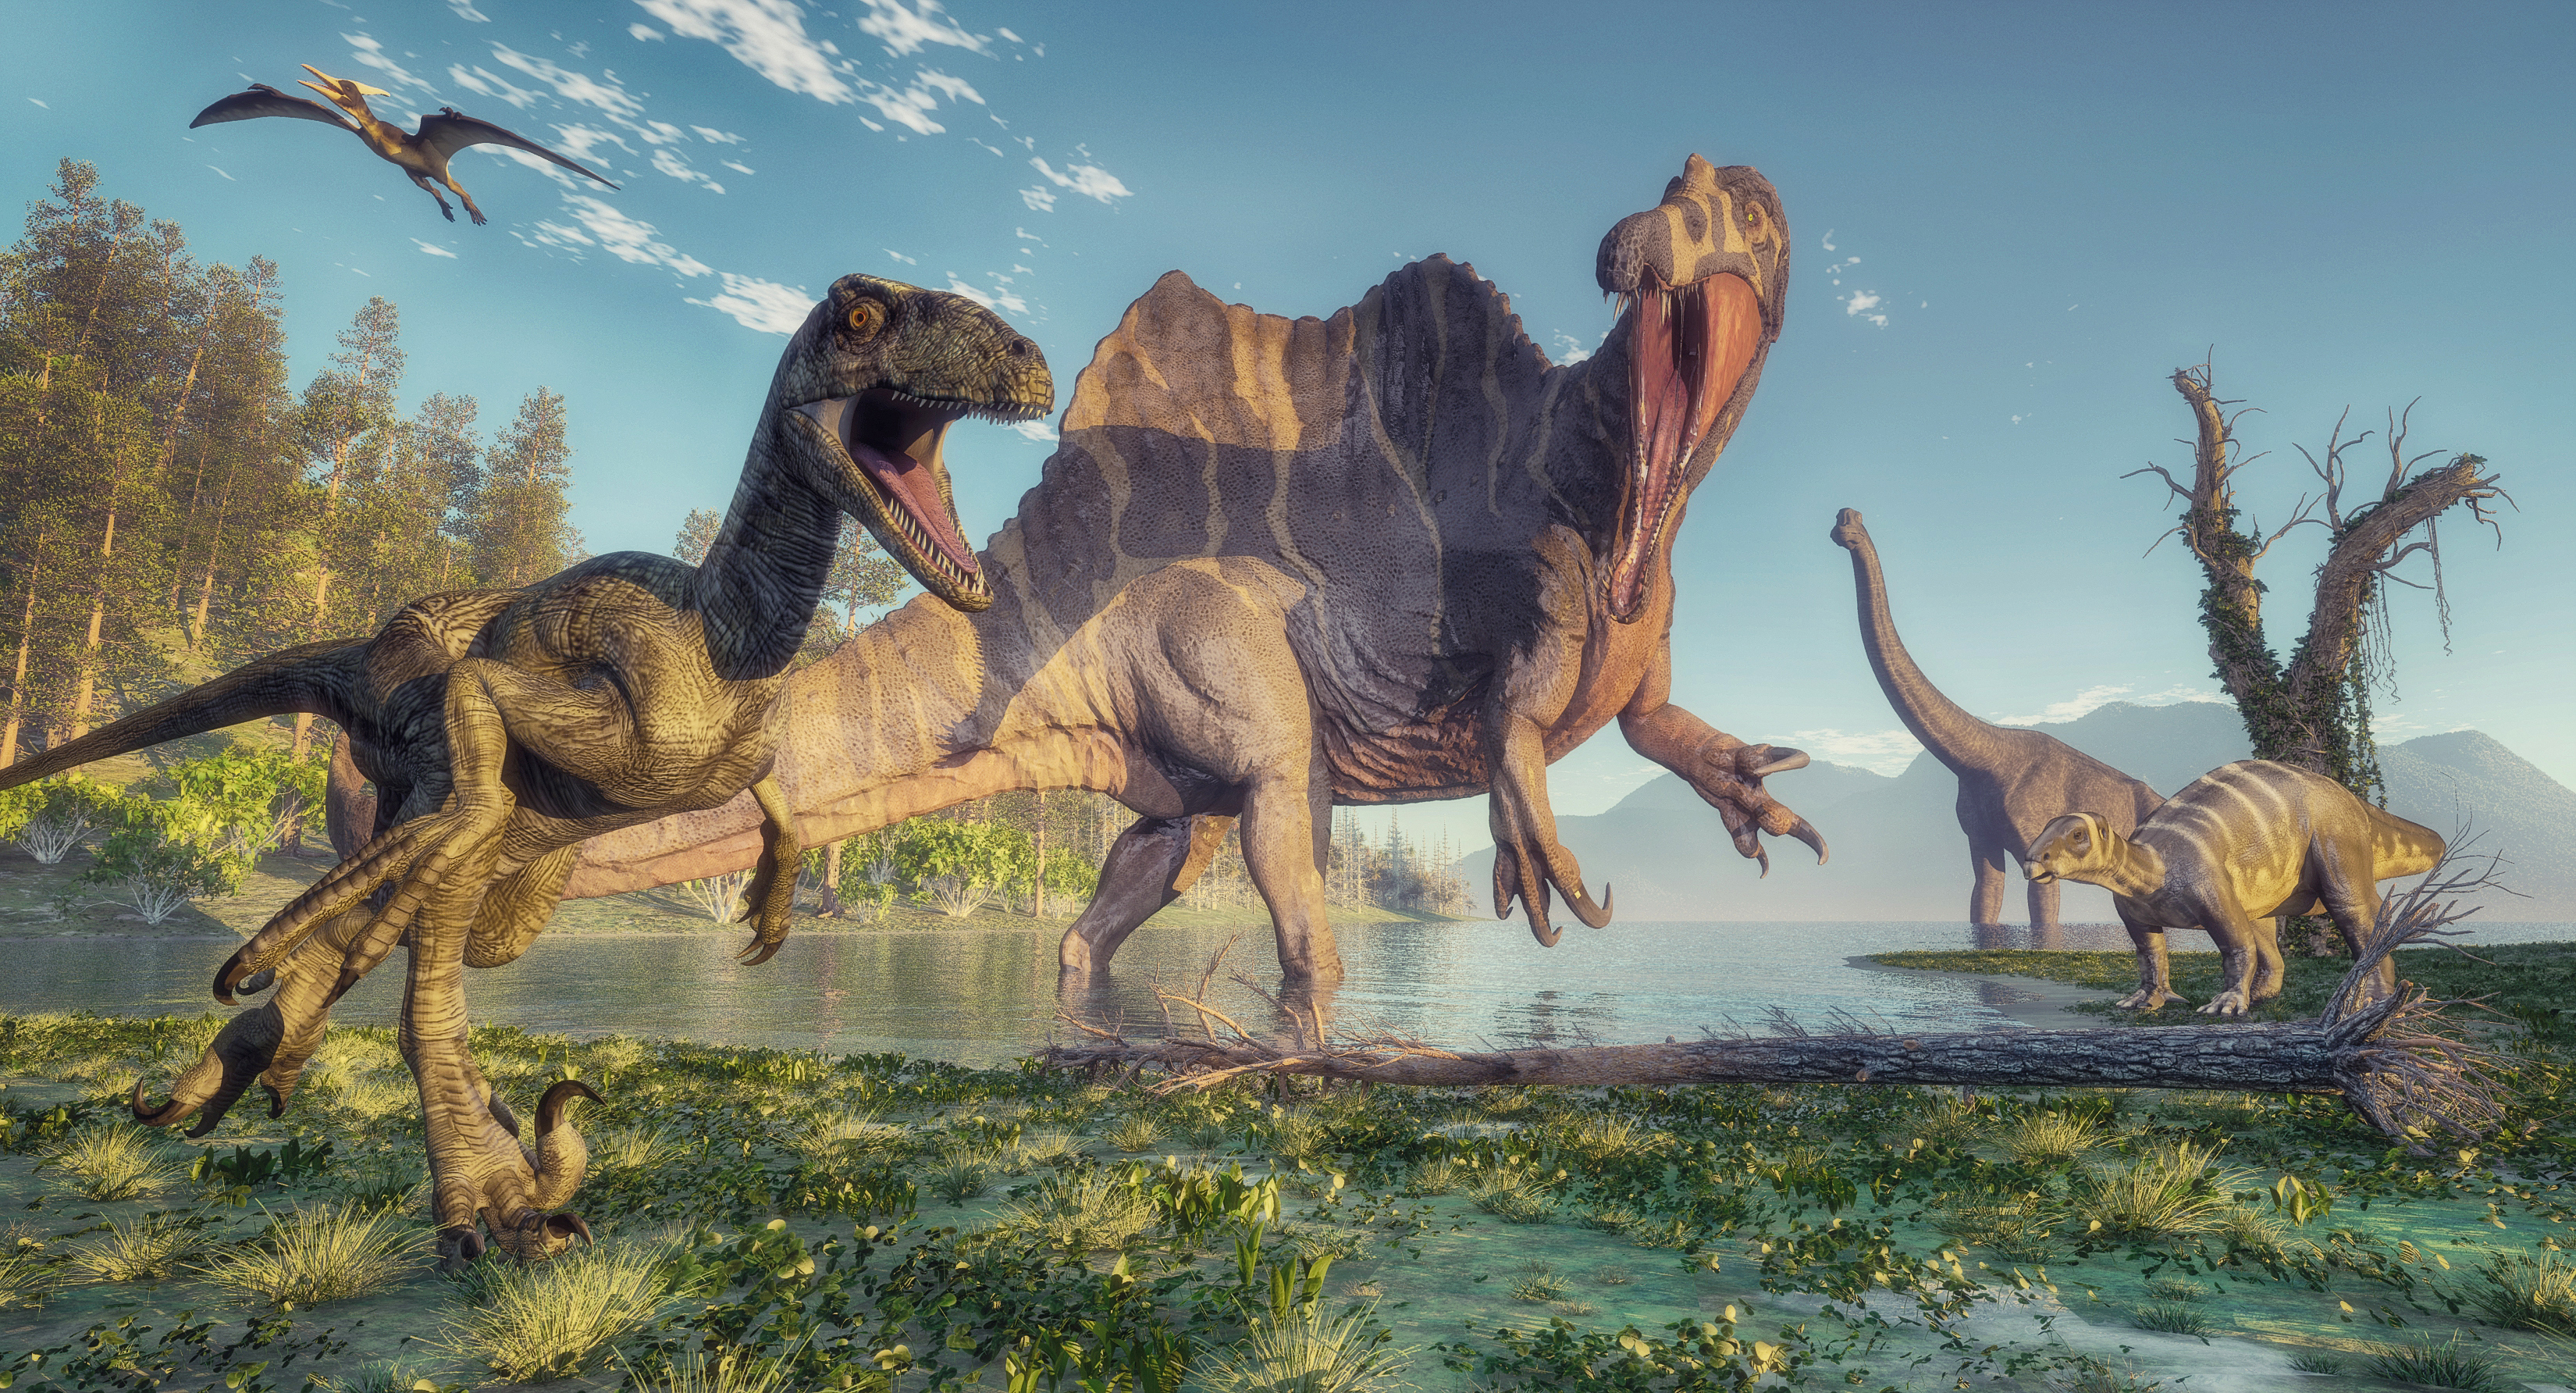 97 Mind-blowing Dinosaur Facts